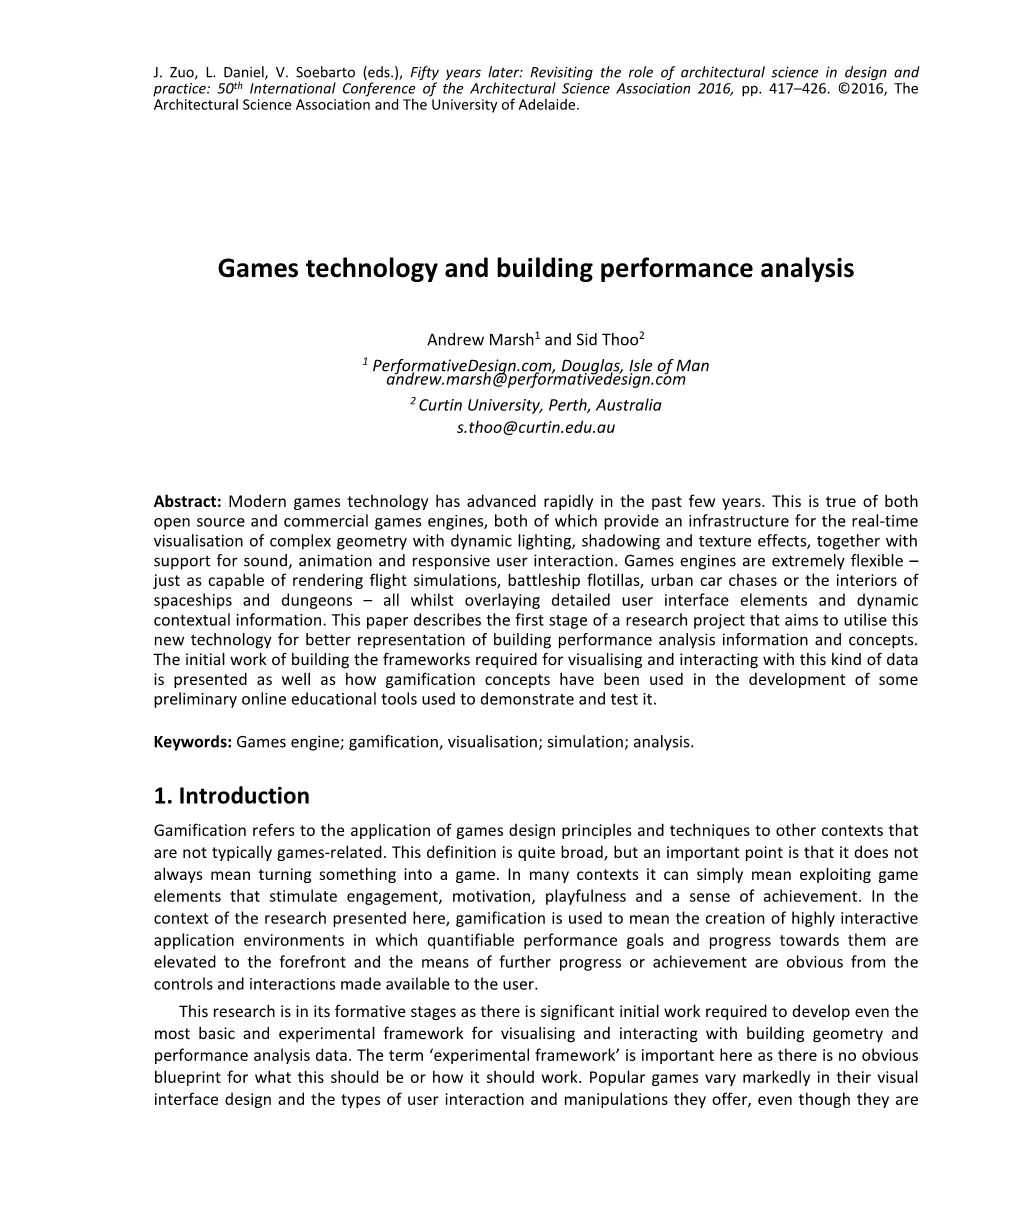 Games Technology and Building Performance Analysis